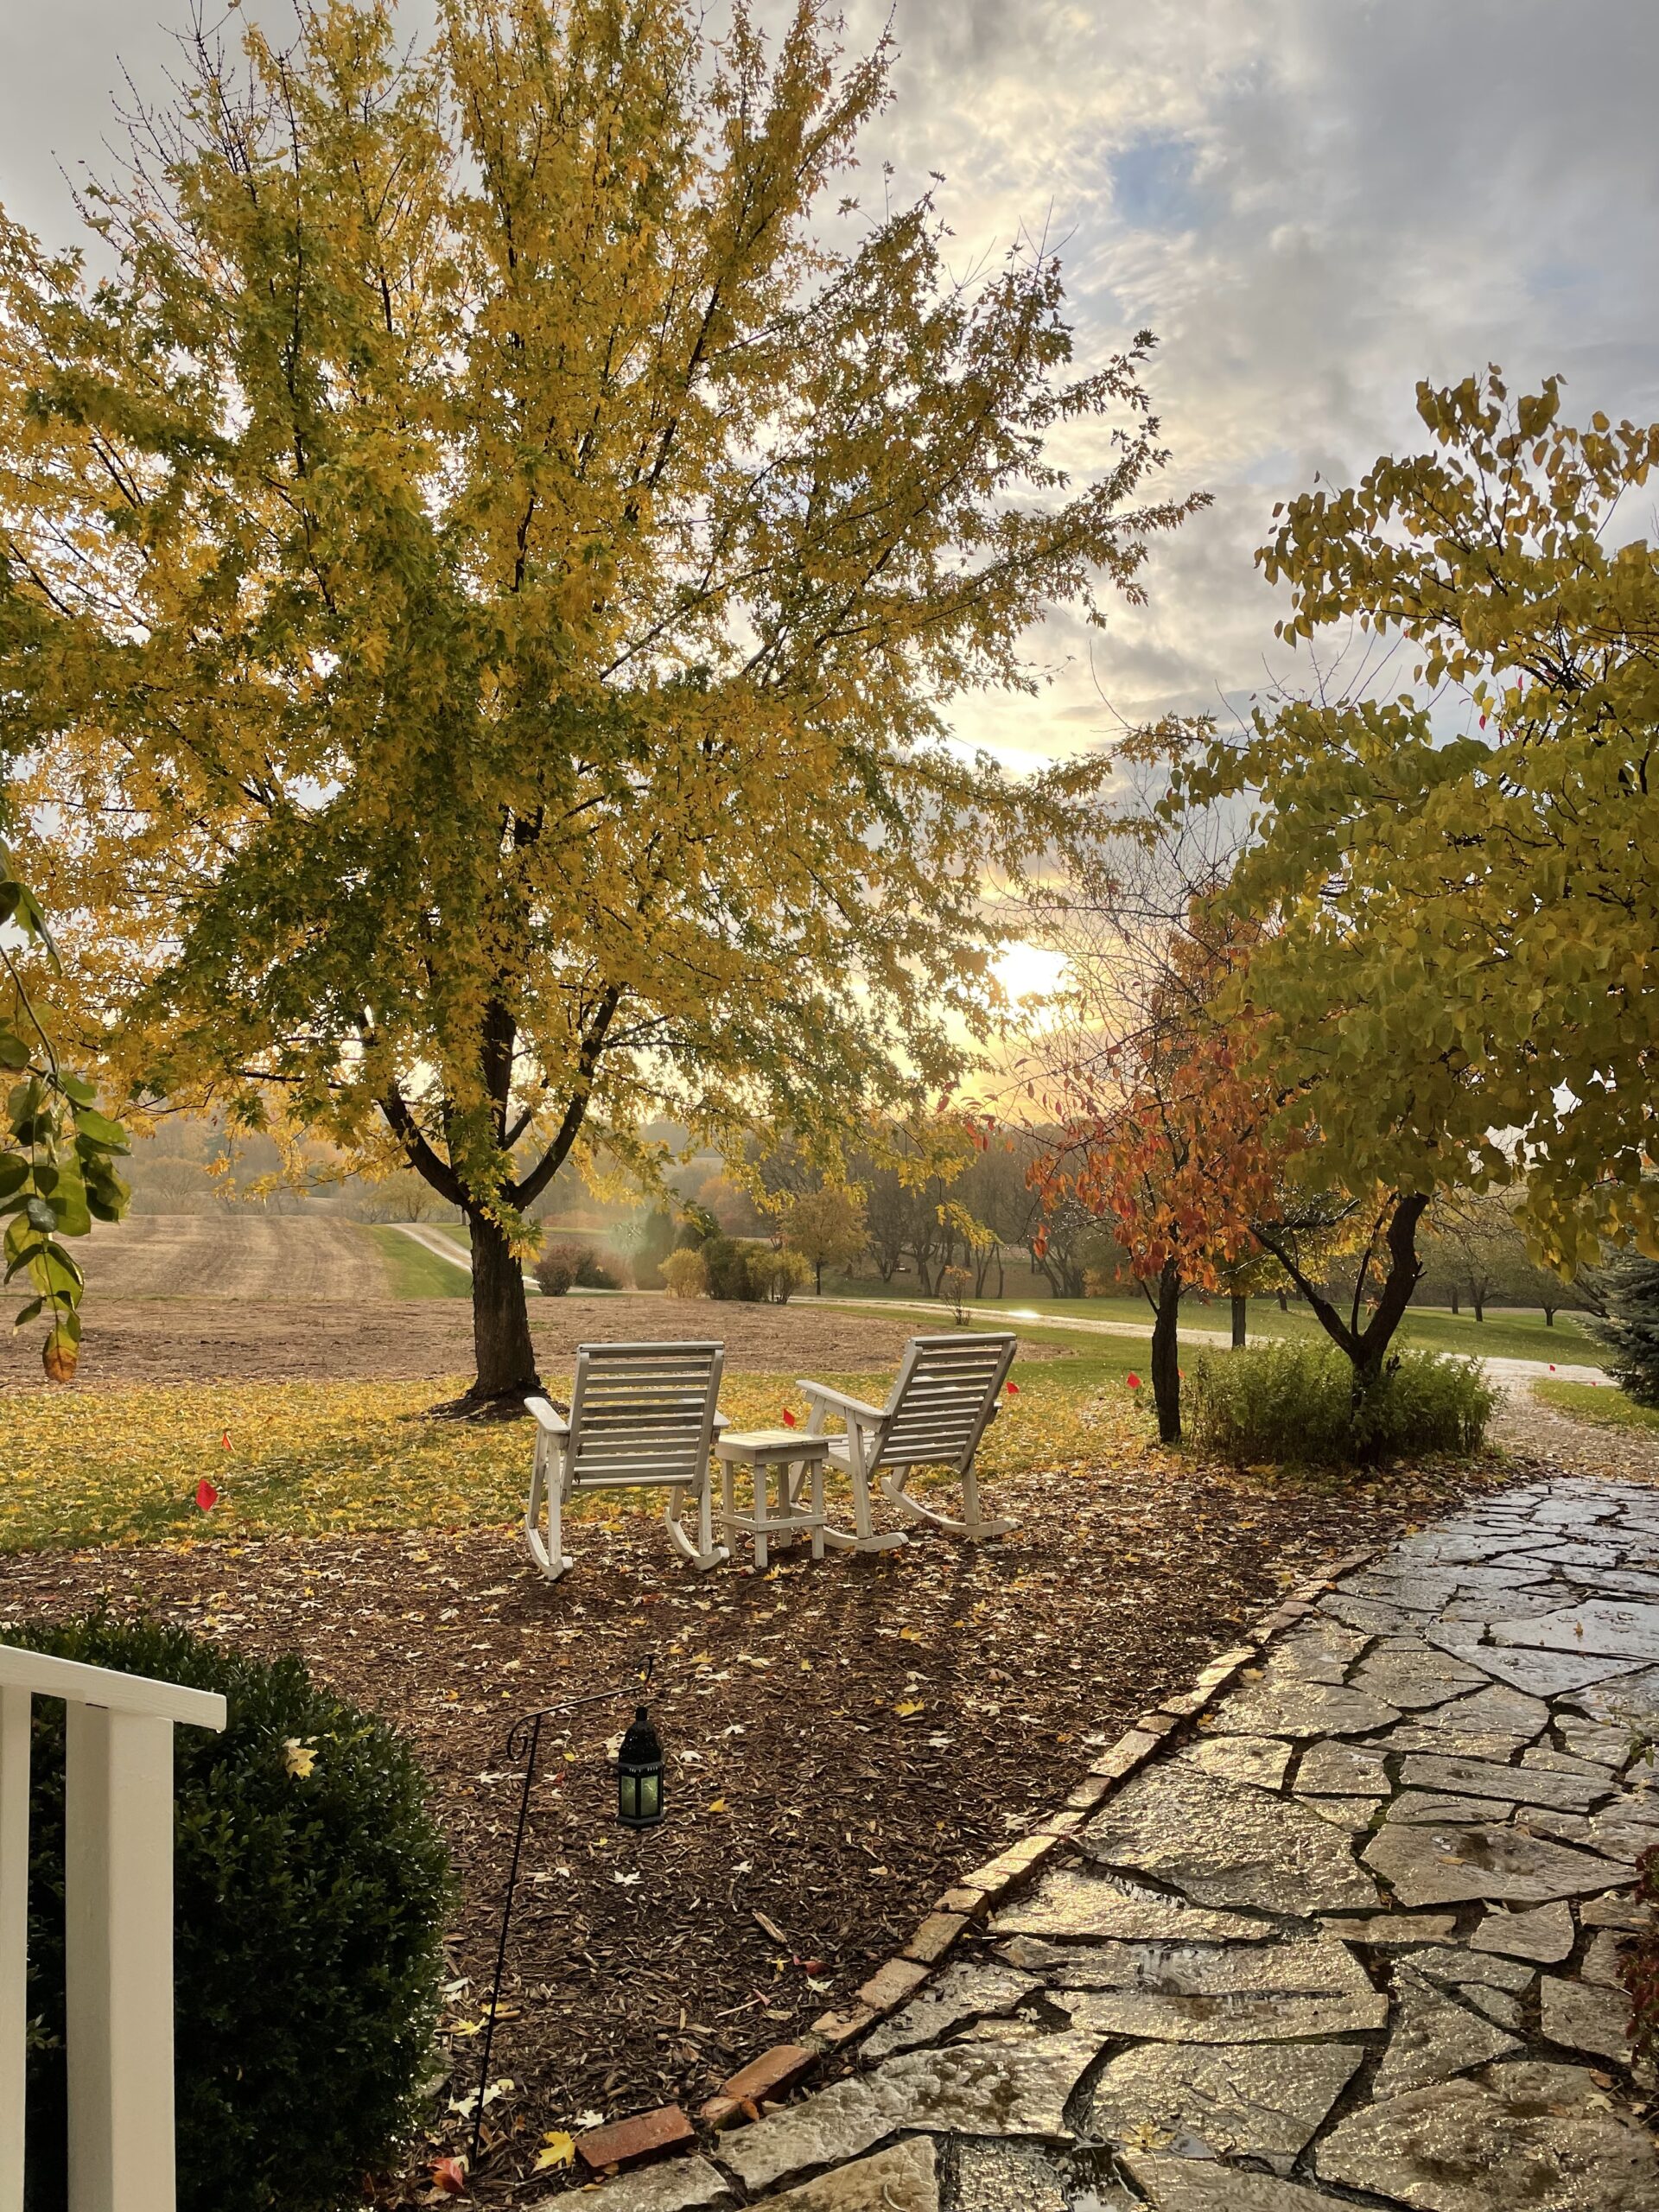 Autumn sunset in distance, stone path and white rocking chairs in foreground